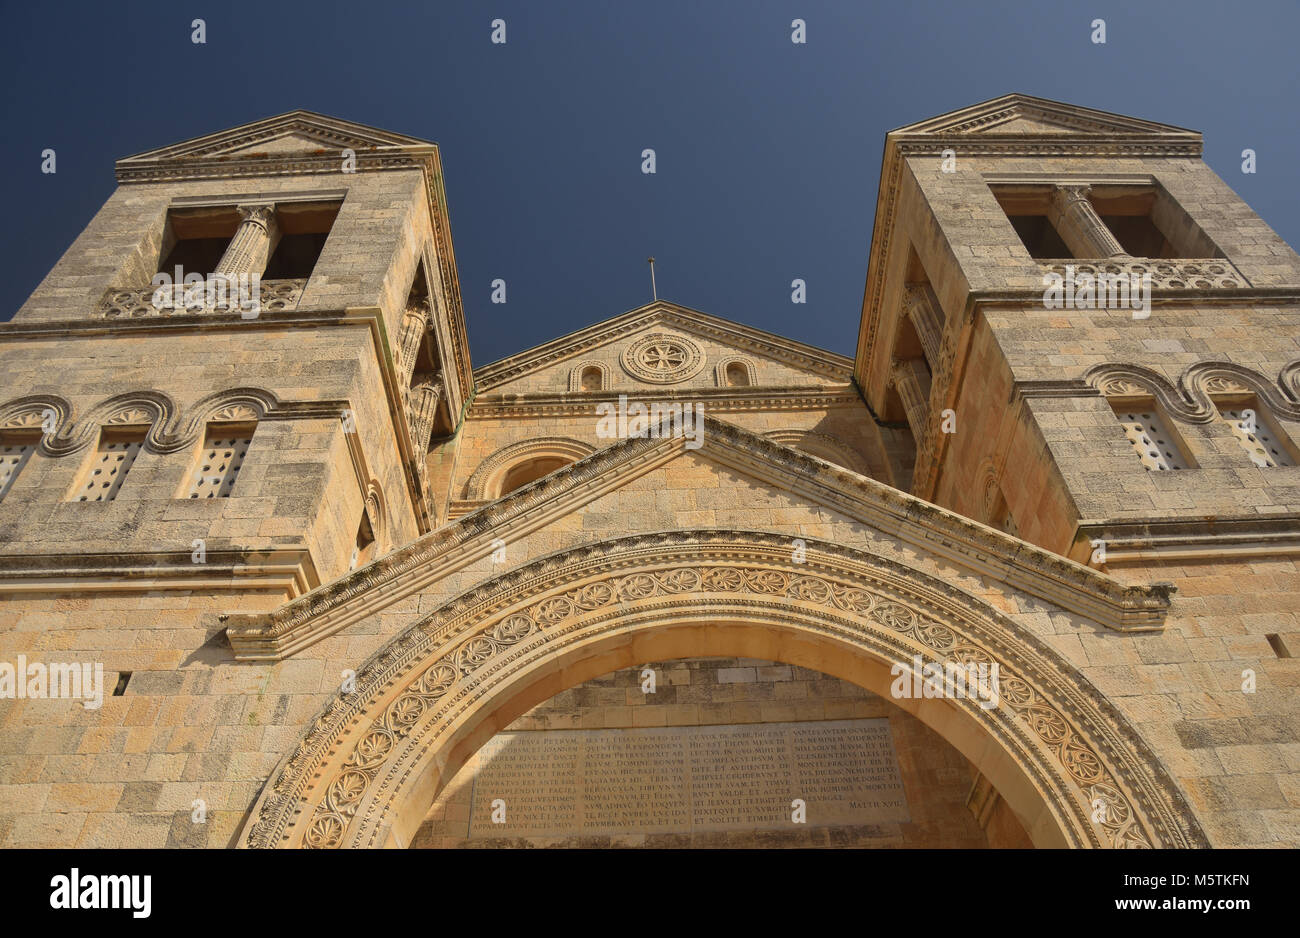 Franciscans monastery (Basilica of the Transfiguration) at the mount Tabor (Har Tavor). Northern Israel. Stock Photo